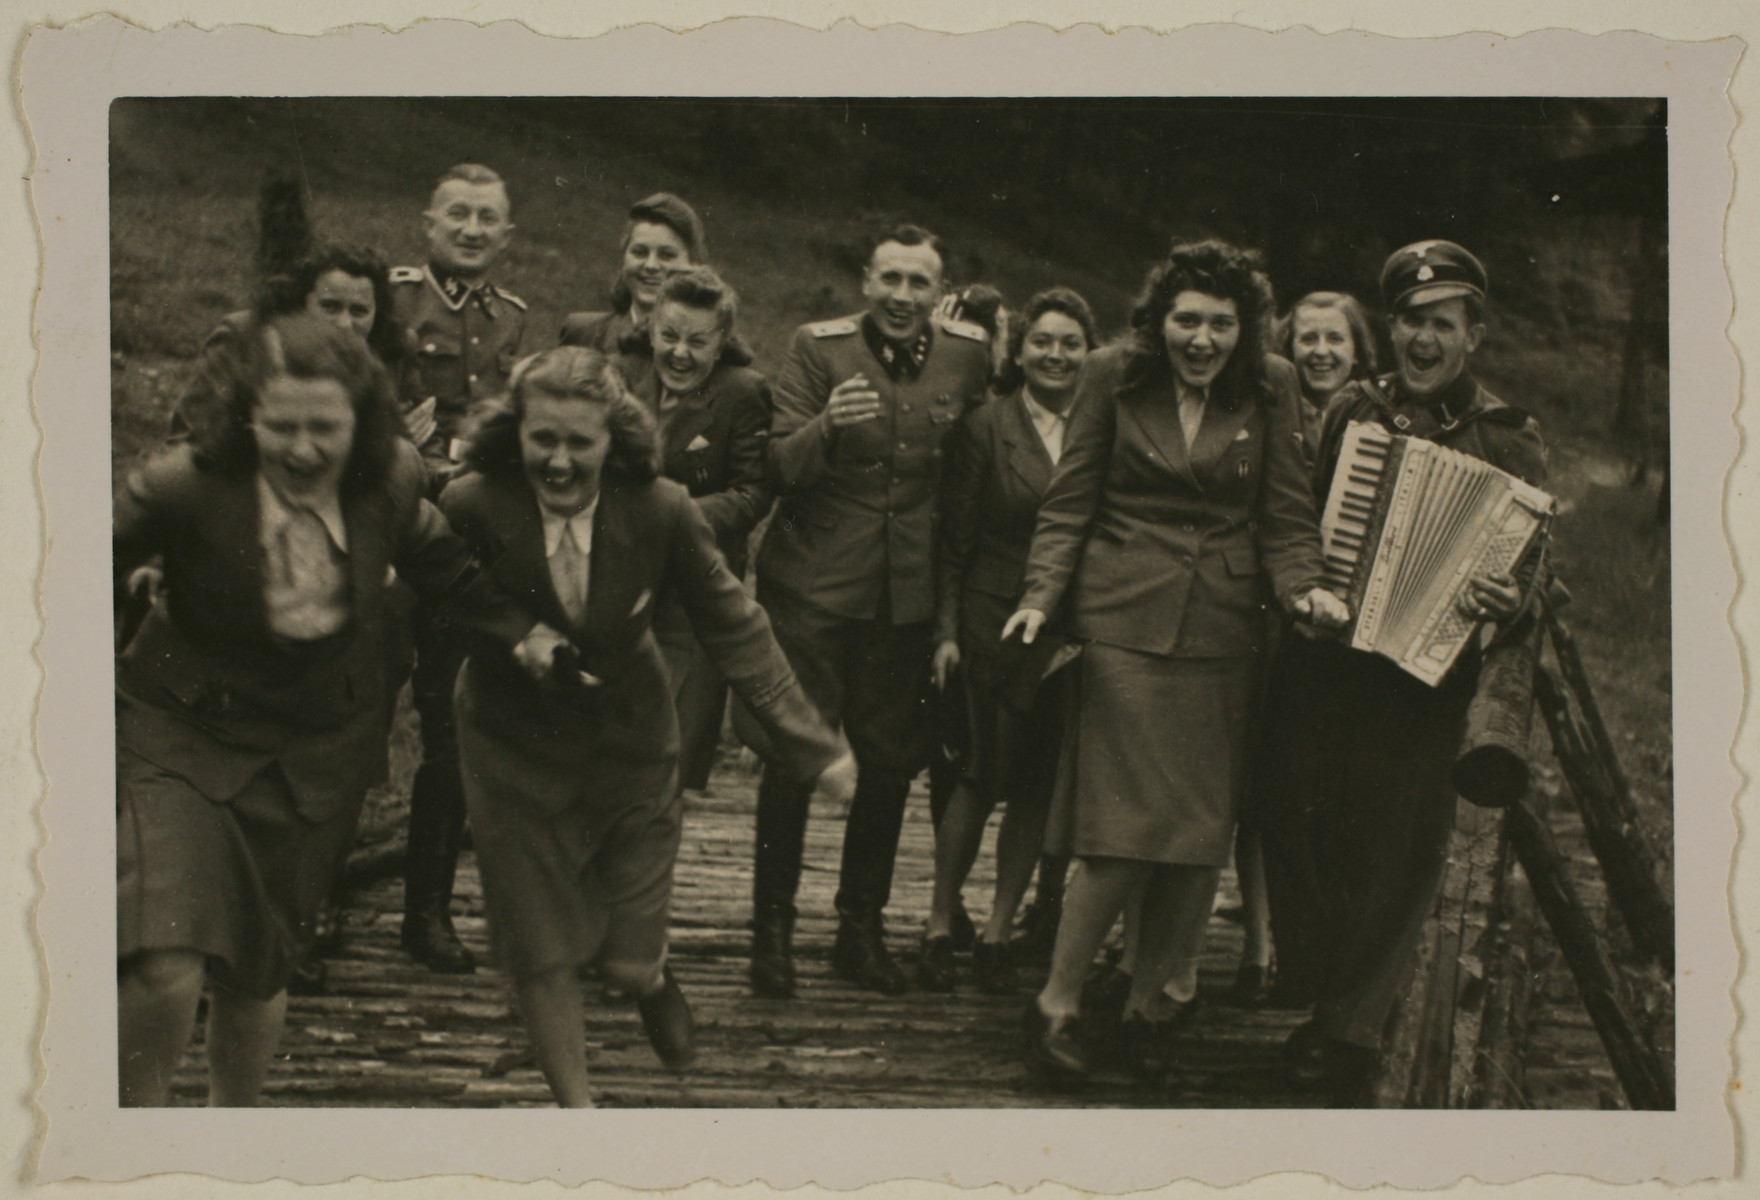 Nazi officers and female auxiliaries (Helferinnen) run down a wooden bridge in Solahuette.  The man on the right carries an accordion.

Karl Hoecker is pictured in the center.

The original caption "Regen aus heiteren Himmel" [Suddenly, it started to rain.]